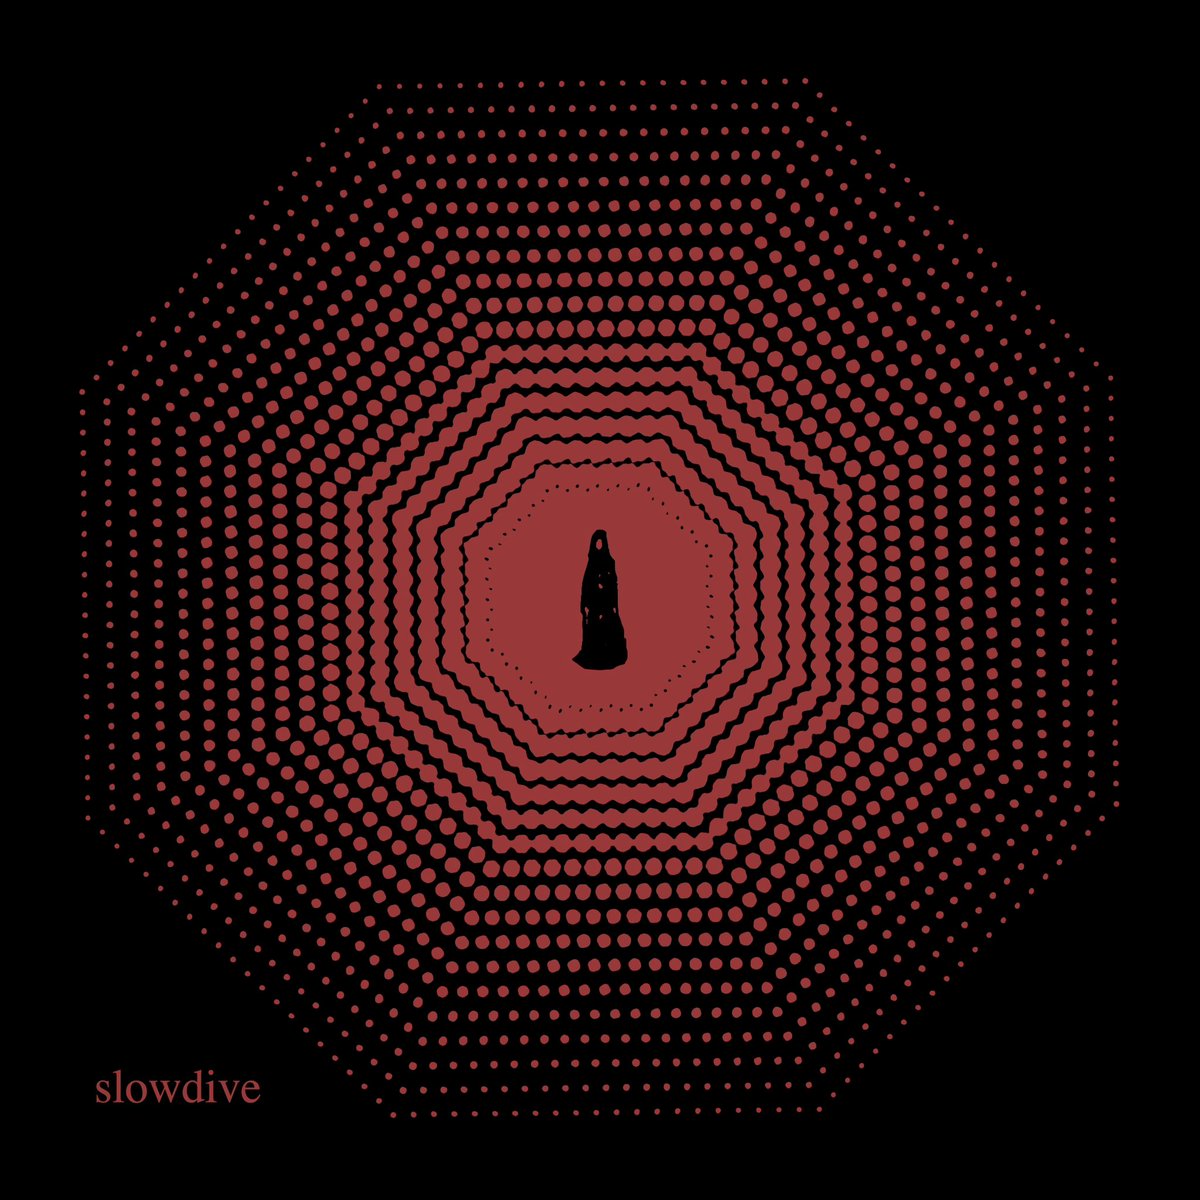 Head to graveface.com to snag a copy of the Graveface exclusive variant of everything is alive by @slowdiveband now! Catch them on their upcoming US tour. I'll be at no less than 4 of the shows. Super excited! xo